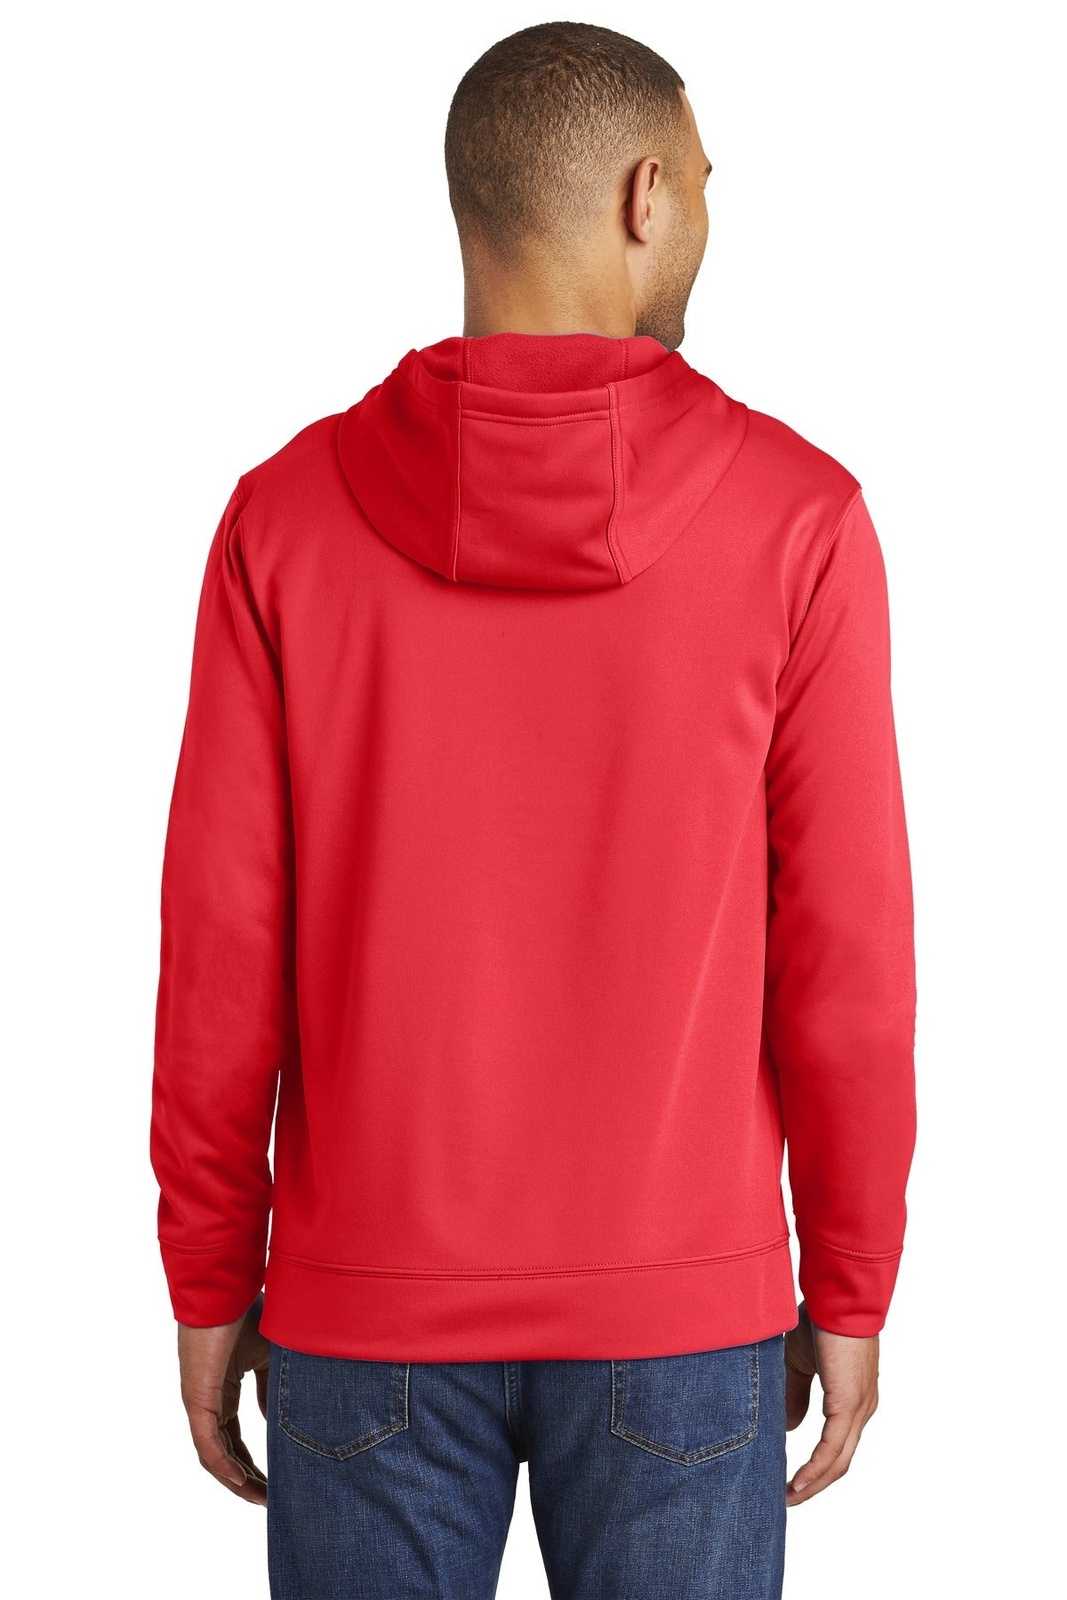 Port & Company PC590H Performance Fleece Pullover Hooded Sweatshirt - Red - HIT a Double - 1